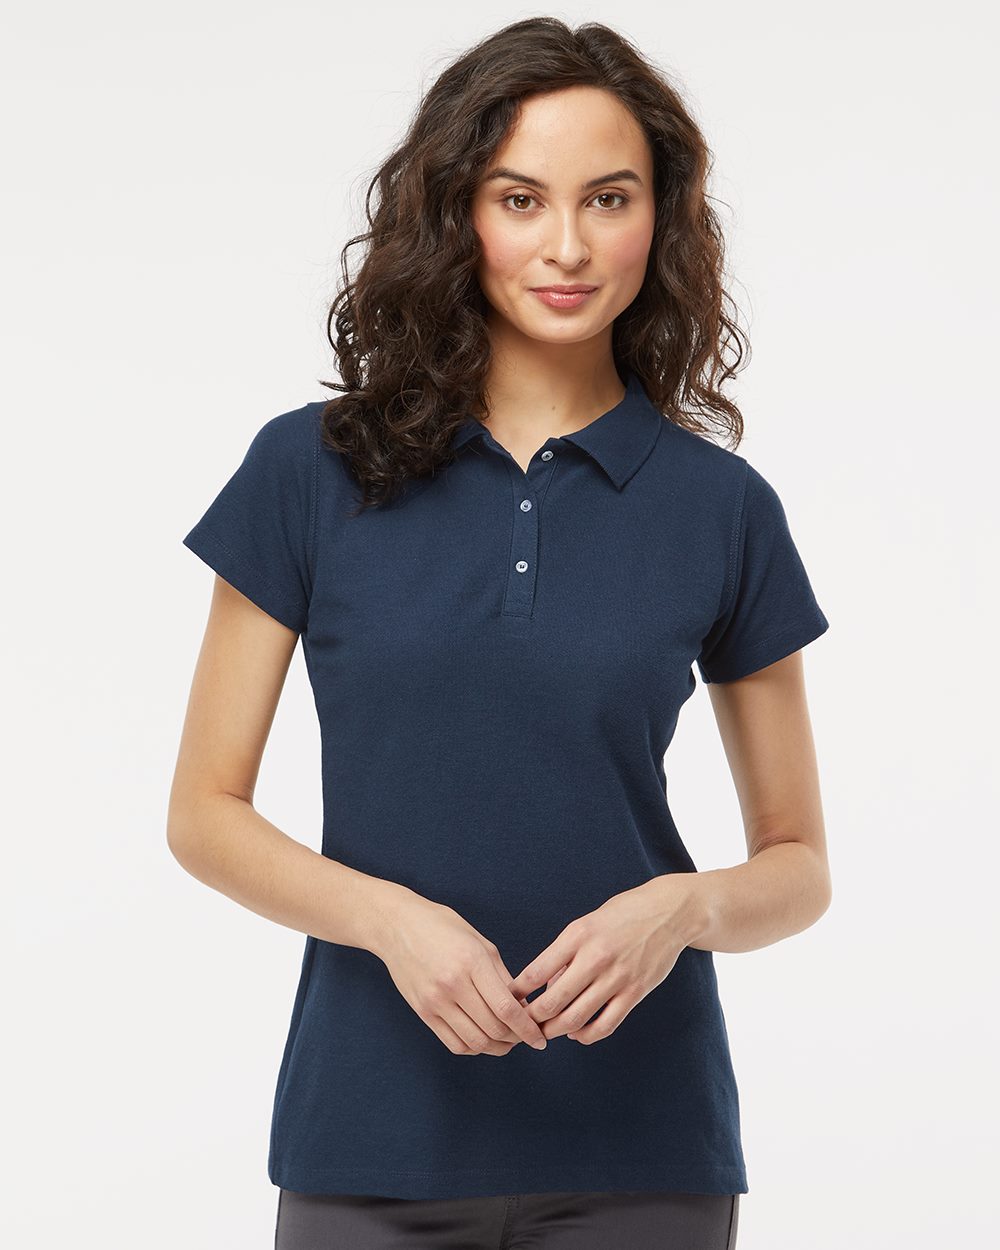 M&O 7007 - Women's Soft Touch Polo